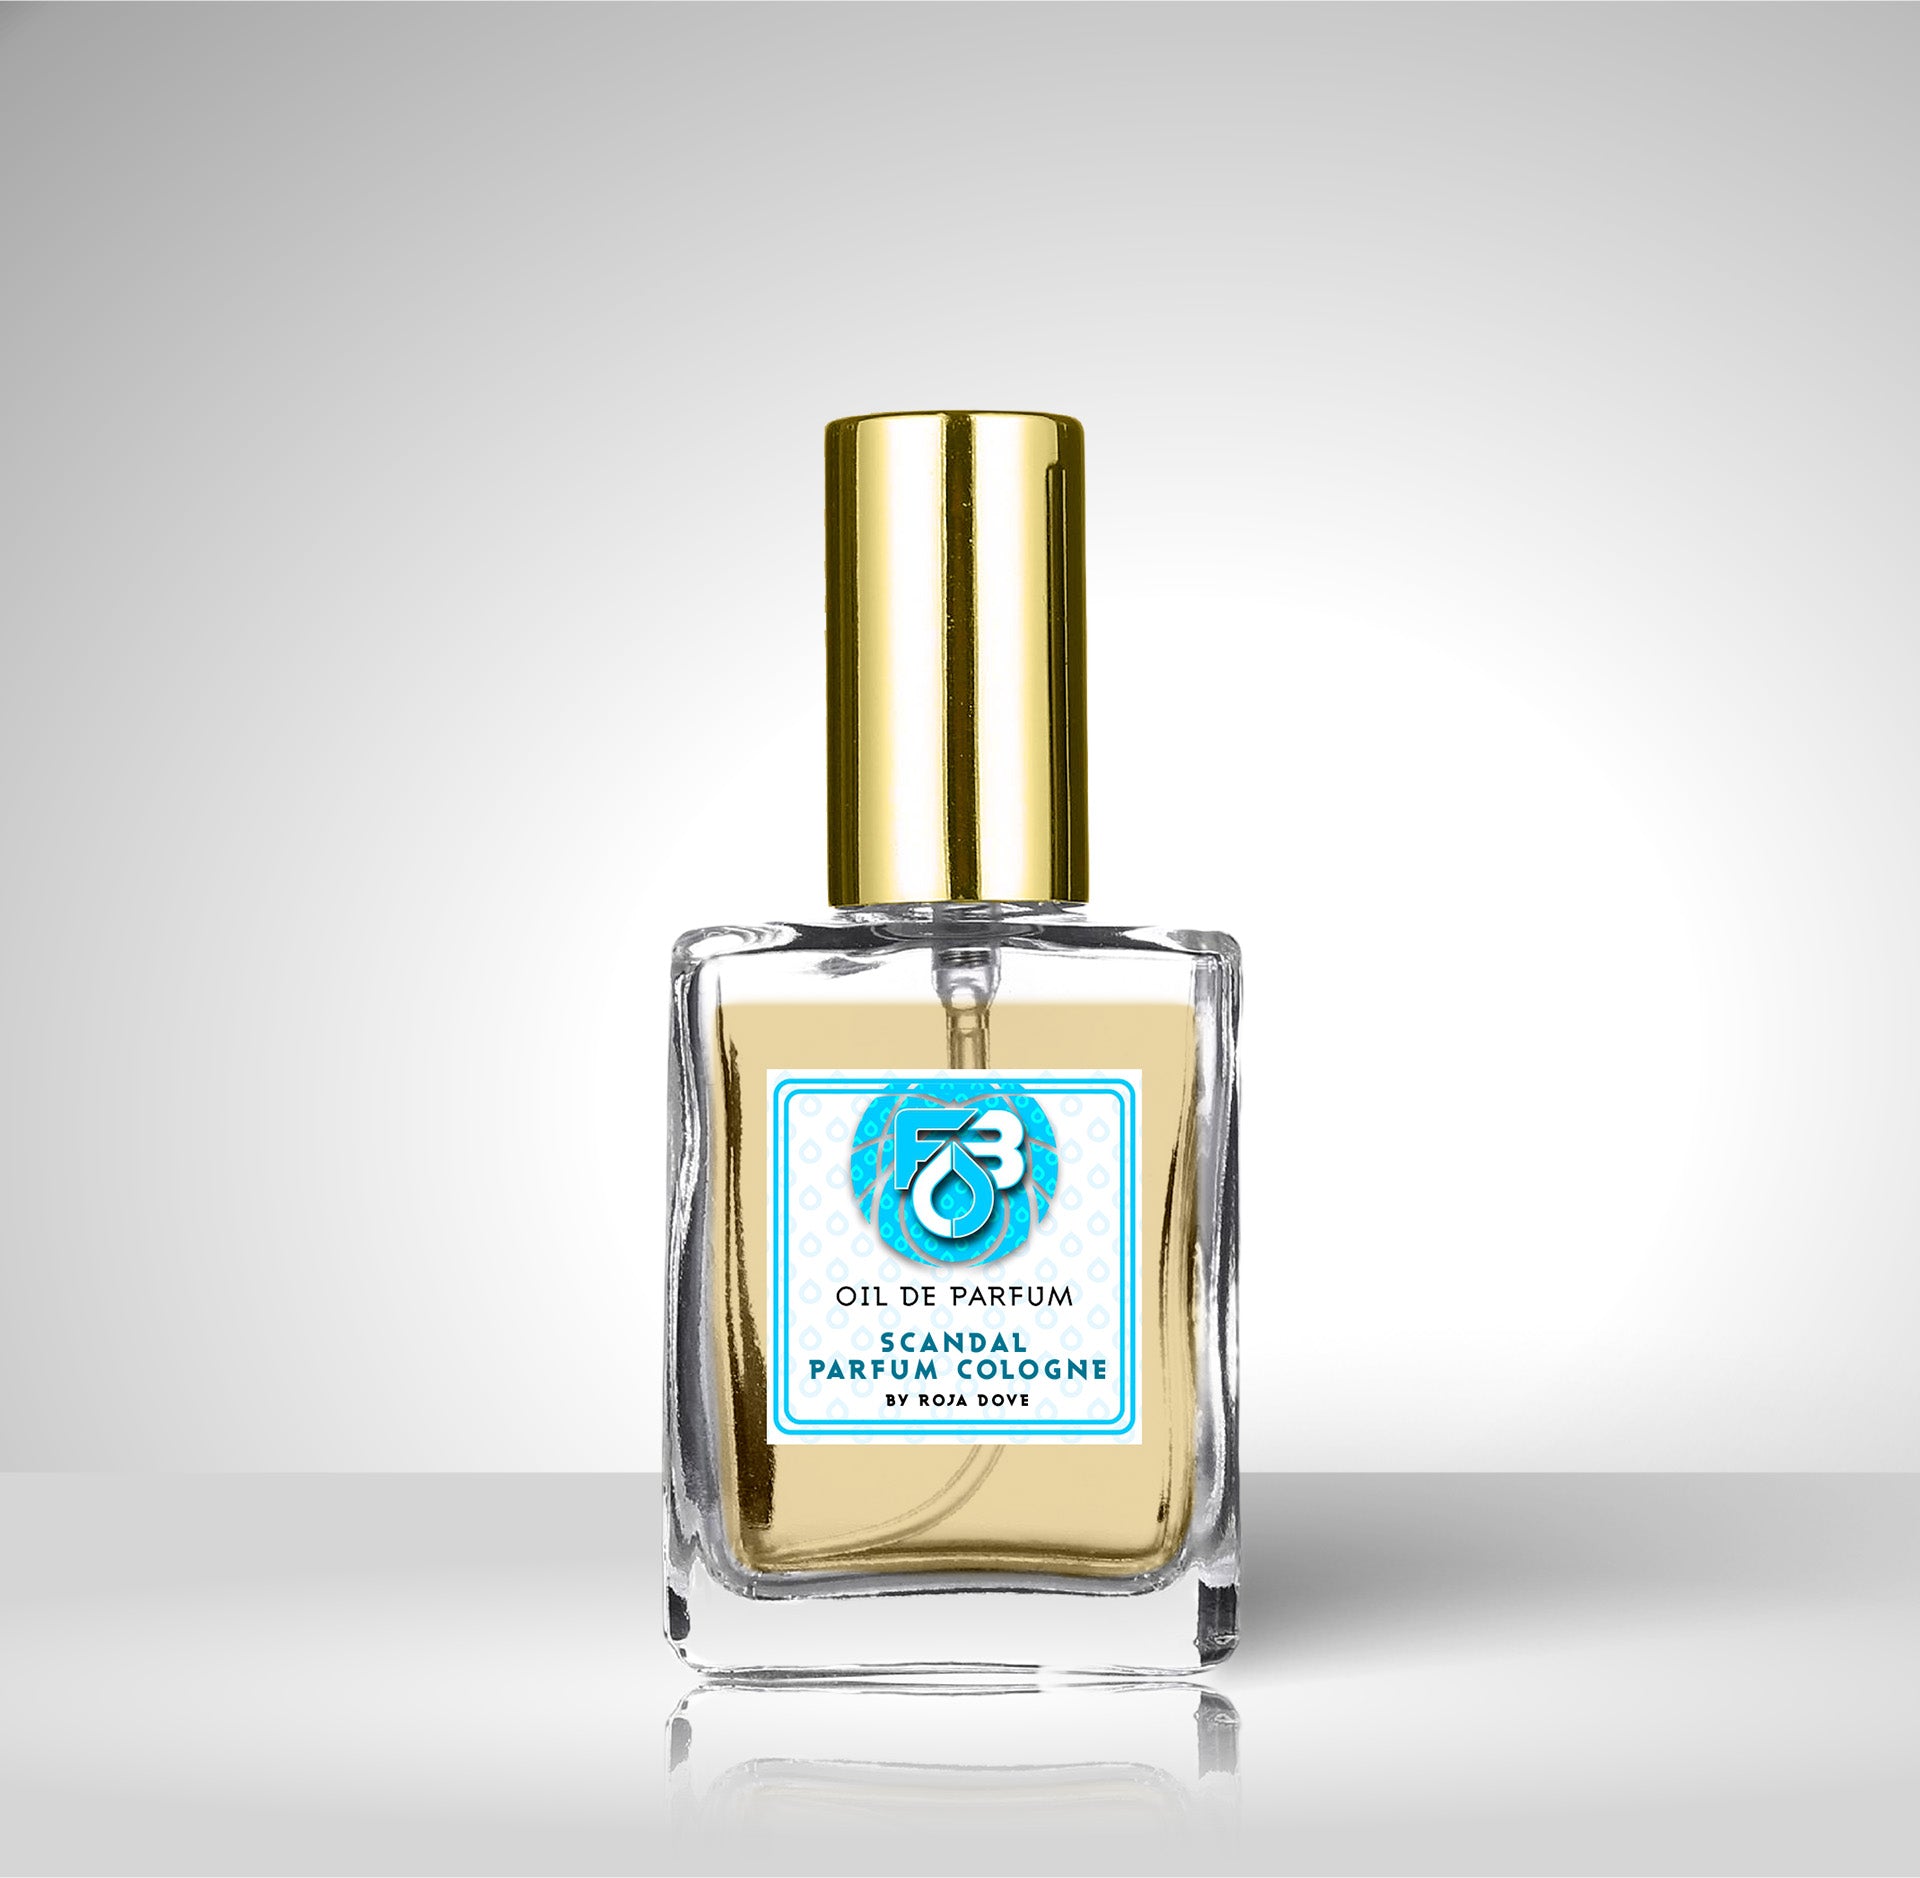 Compare Aroma To Scandal Pour Homme Parfum Cologne